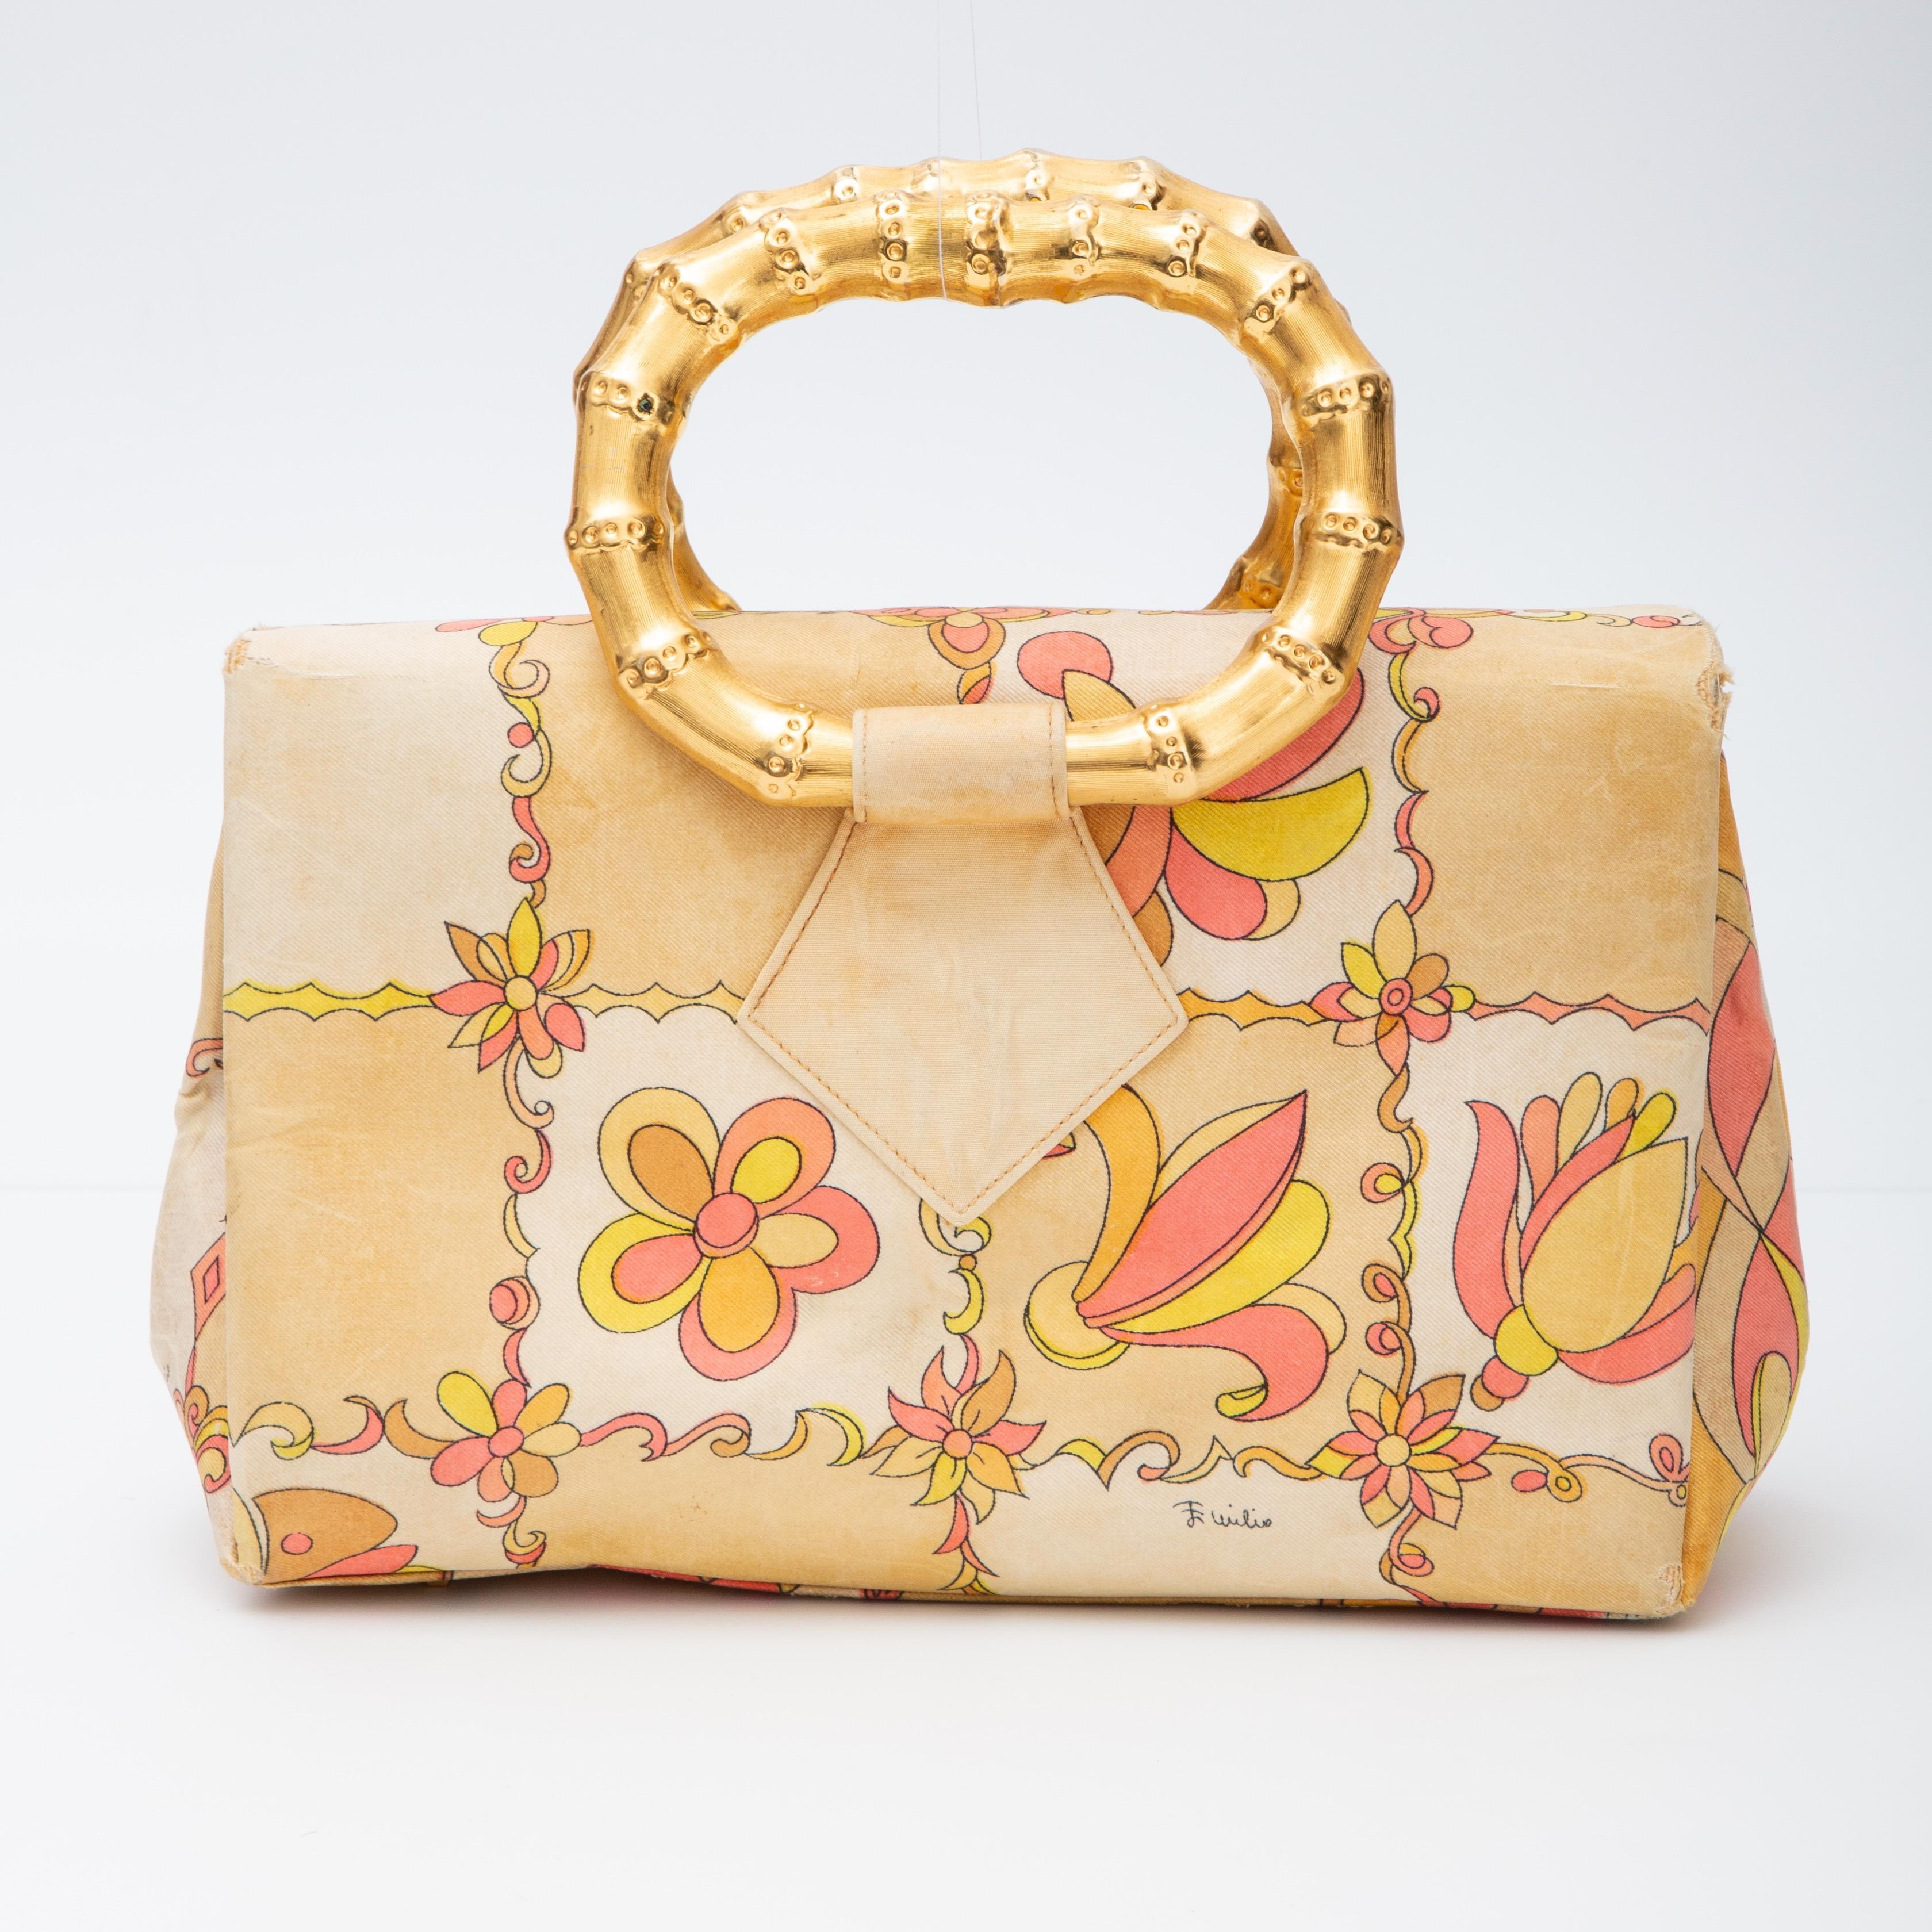 COLOR: Yellow
MATERIAL: Cloth
MEASURES: H 6” x L 10” x D 3.1”
DROP: 3”
CONDITION: Fair - discoloration, indentations to fabric, scratches signs of age throughout.

Made in Italy